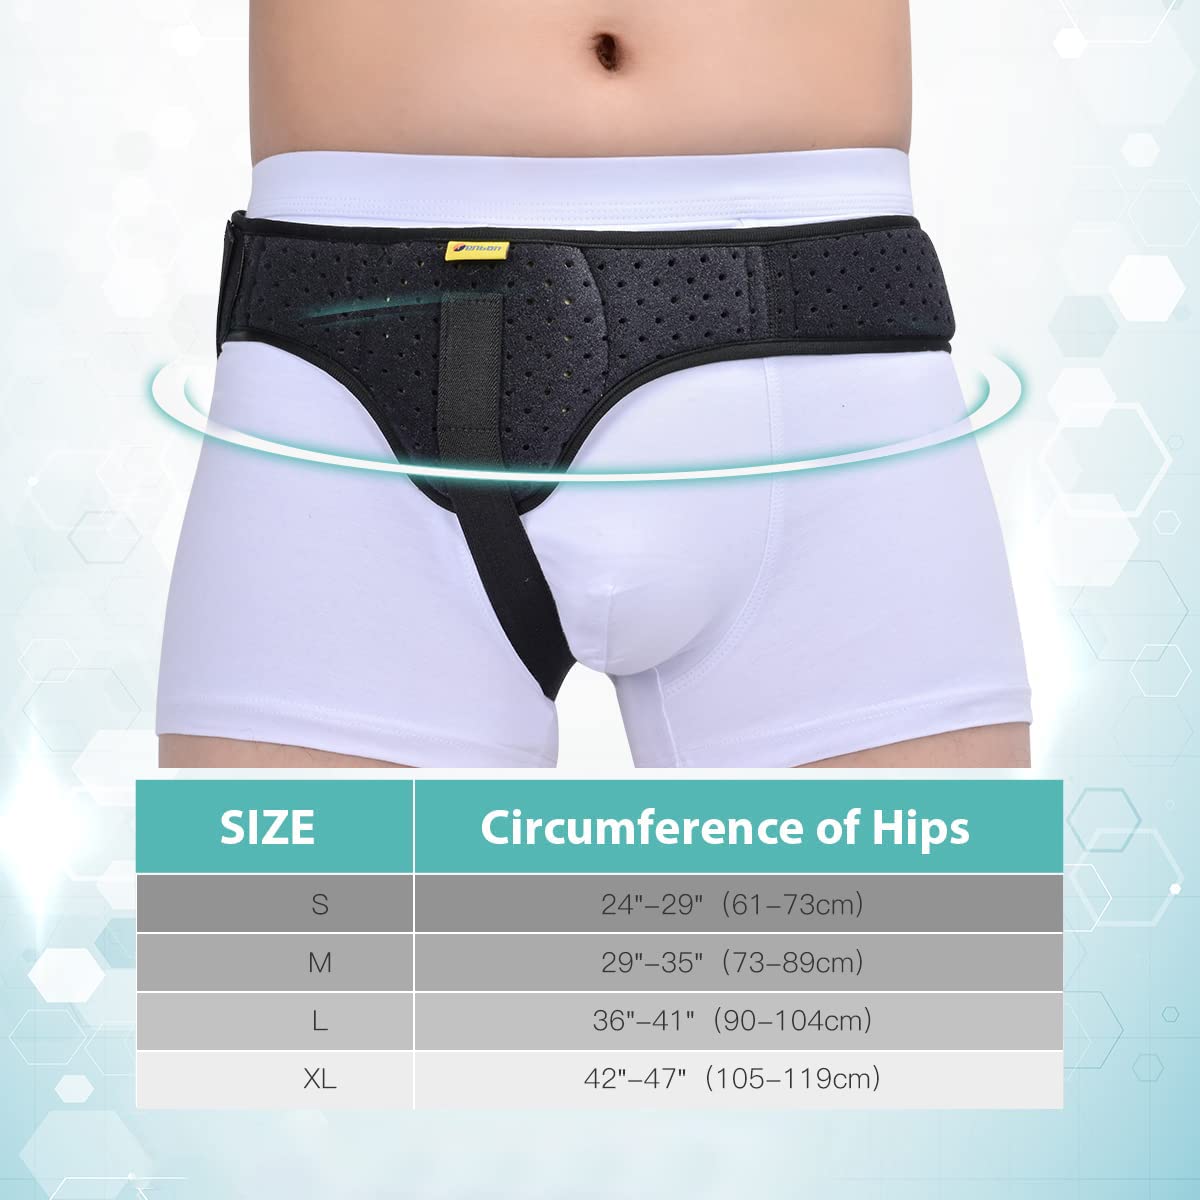 Tenbon Hernia Belt Truss for Men and Women Left or Right Side Supportive Groin Pain Truss With Removable Compression Pads For Pre or Post-Surgical Scrotal, Femoral, Comfortable Adjustable Waist Strap Hernia Guard